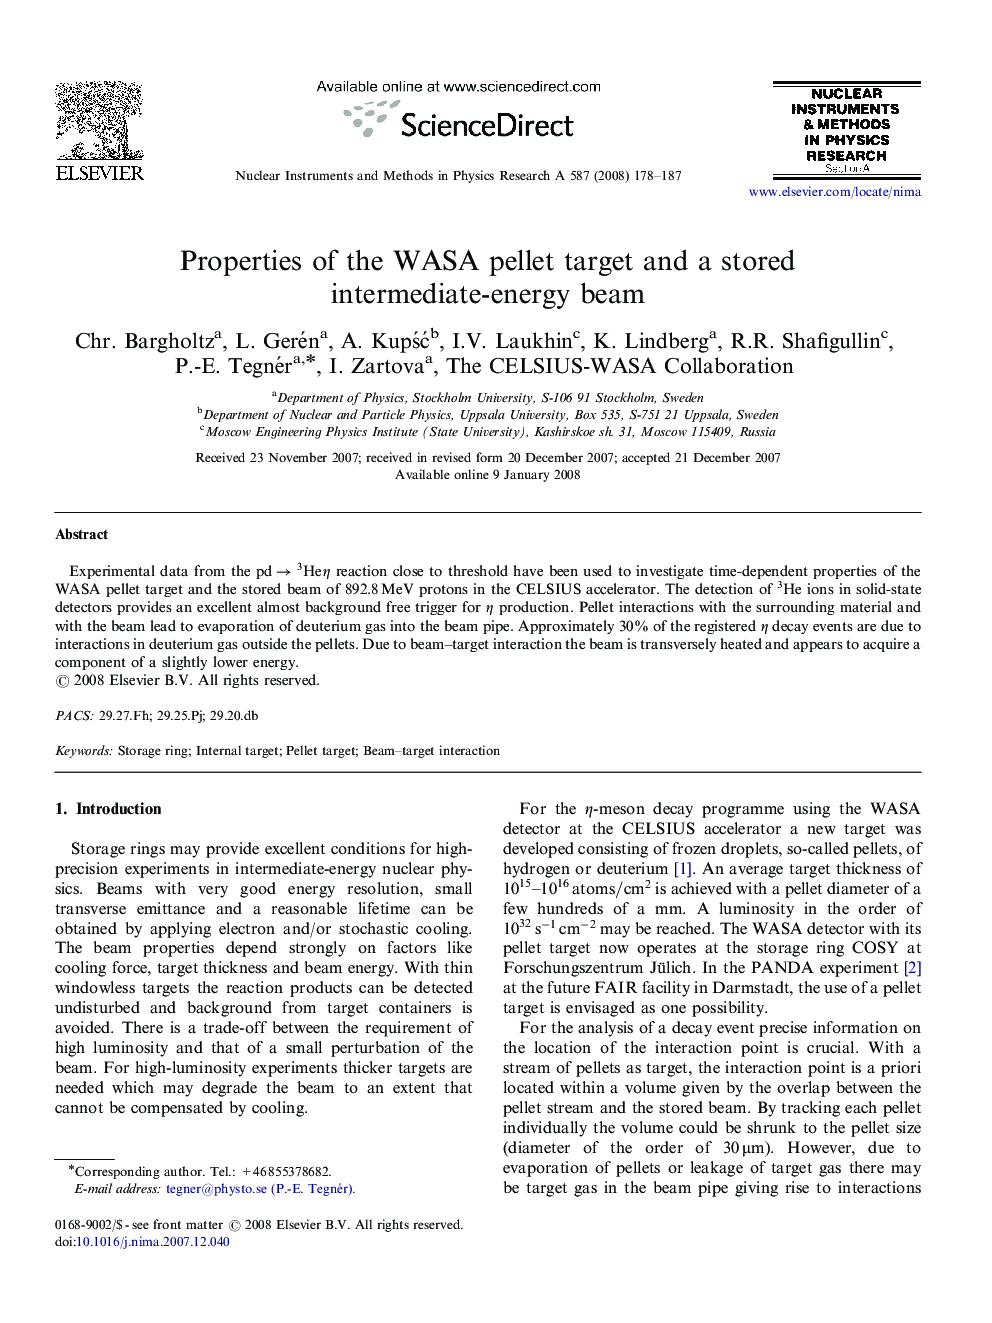 Properties of the WASA pellet target and a stored intermediate-energy beam